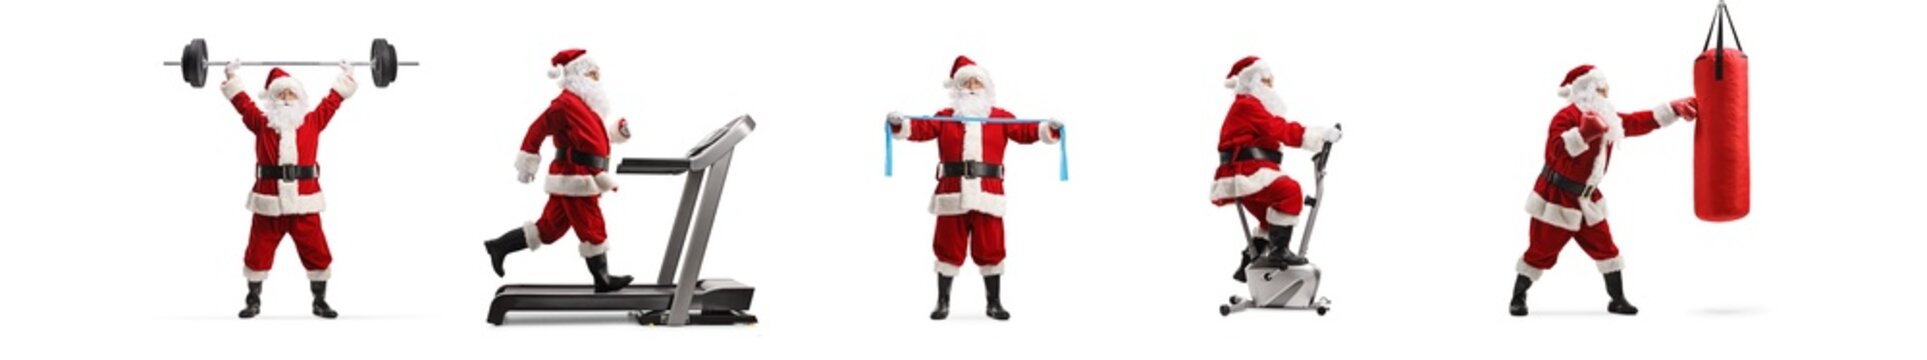 Santa clauses exercising with different sports equipment